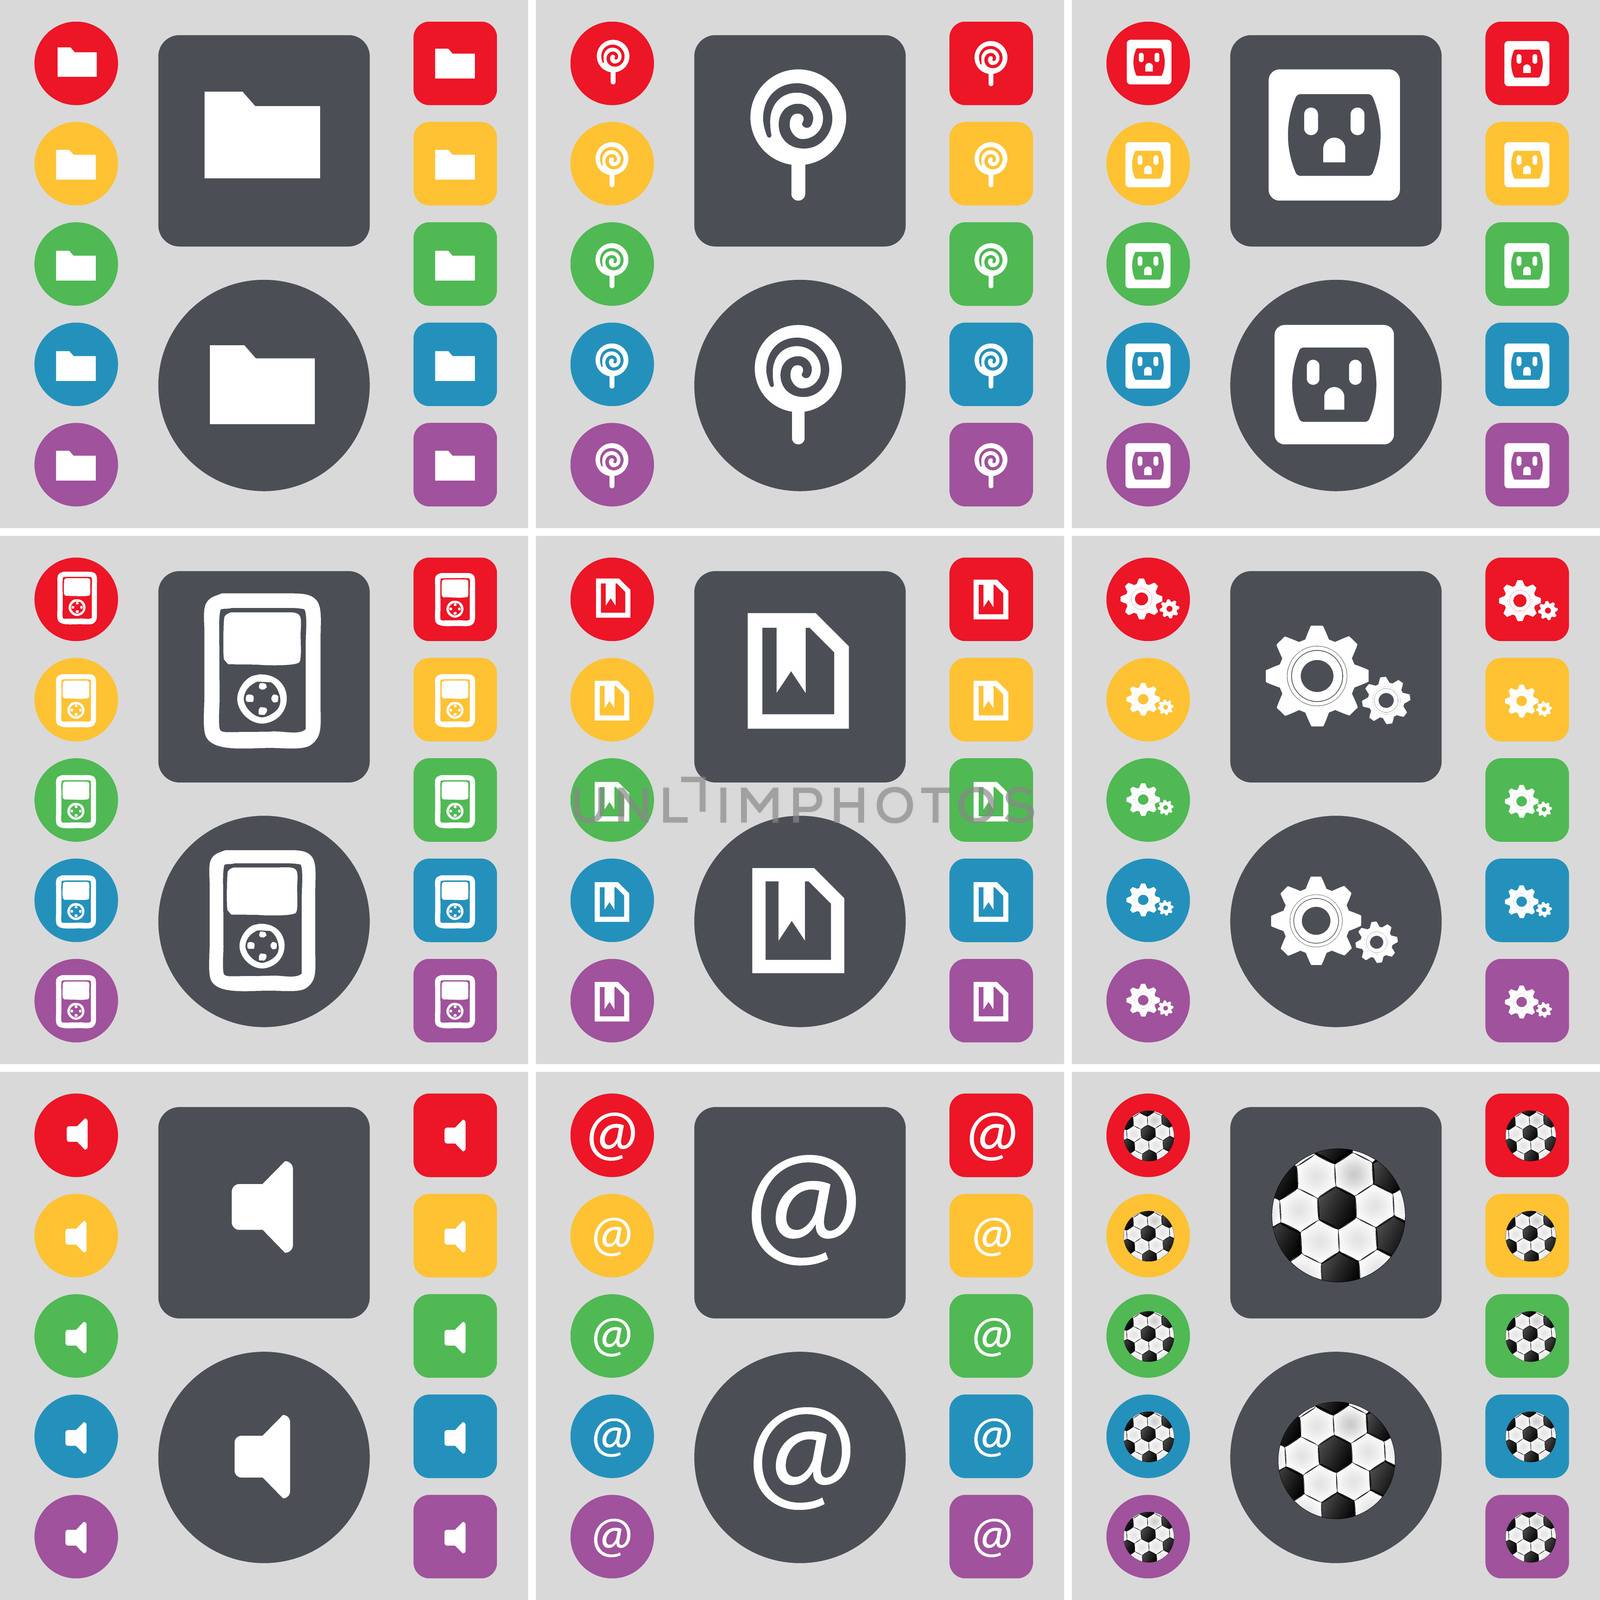 Folder, Lollipop, Socket, Player, File, Gear, Sound, Mail, Ball icon symbol. A large set of flat, colored buttons for your design. illustration